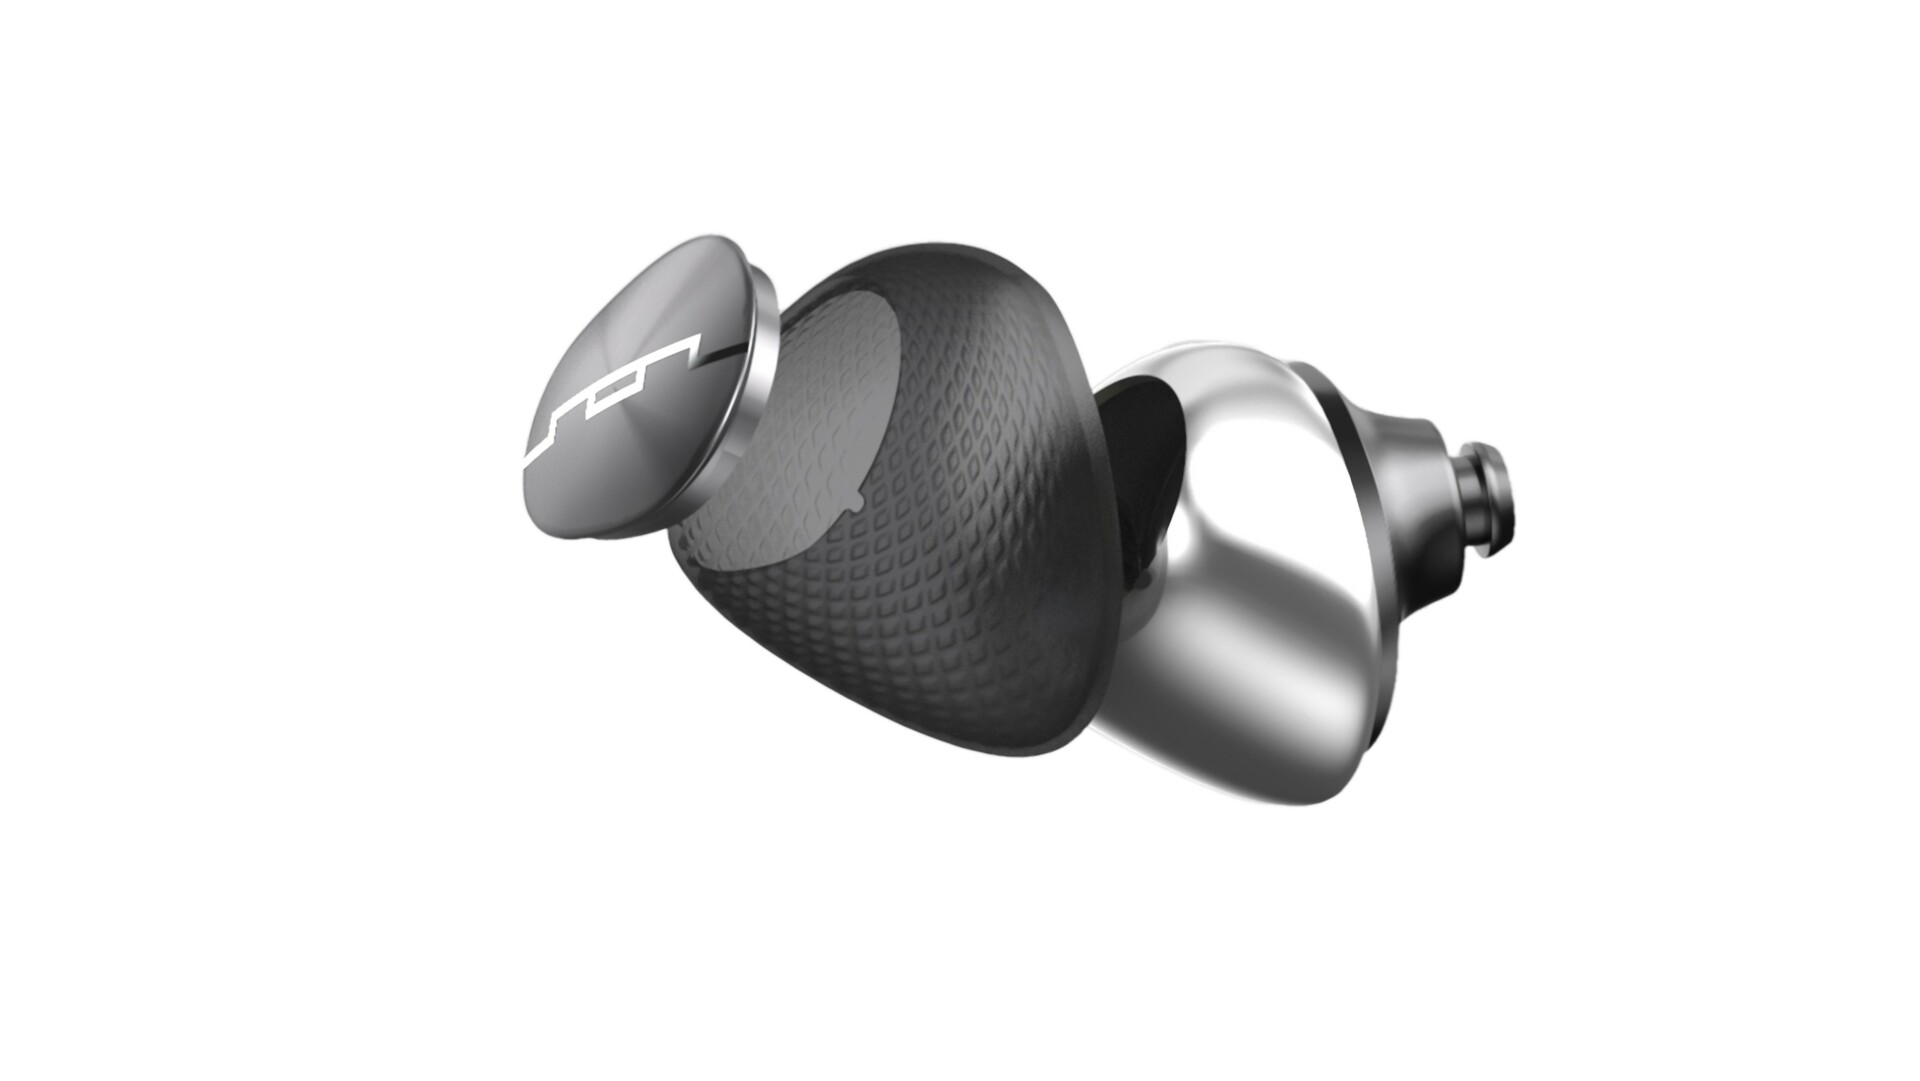 Sol Republic Amps Air + true wireless earbuds in black on gray background.